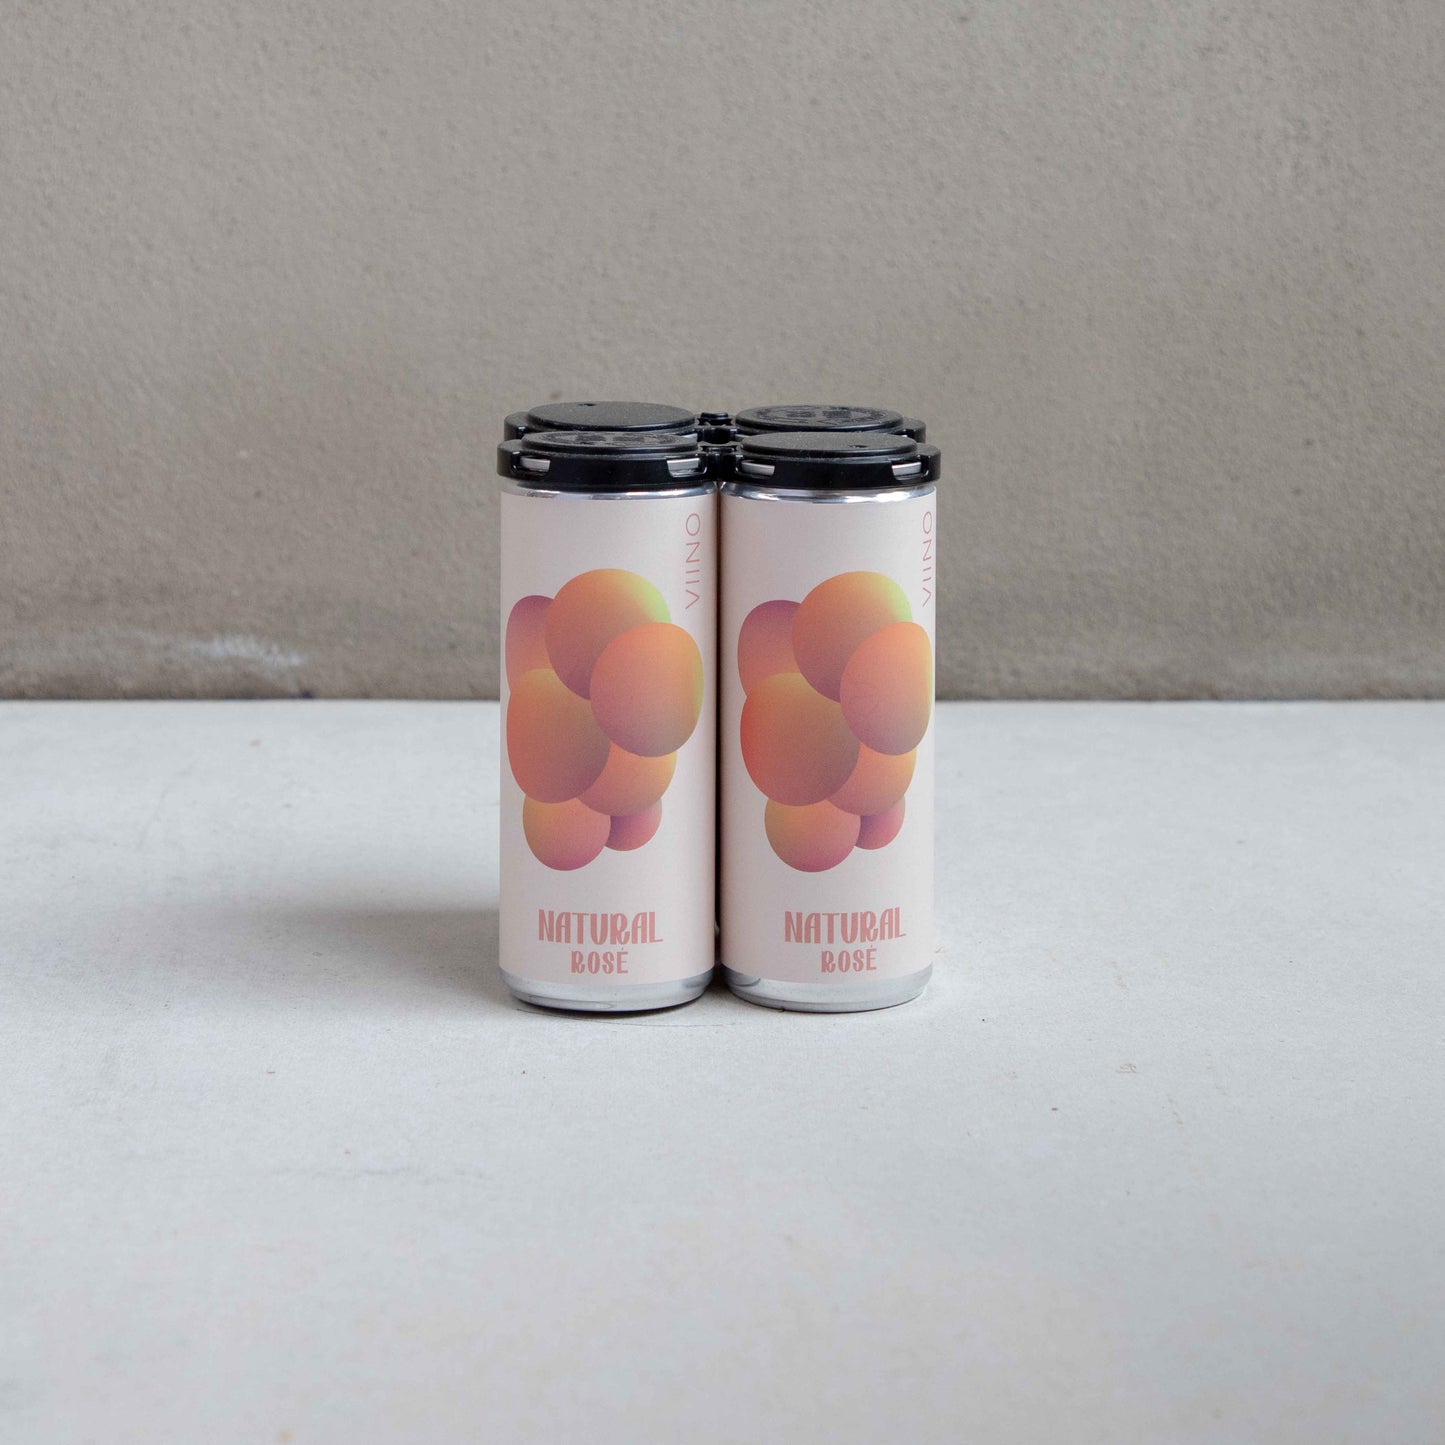 NATURAL ROSE CANS